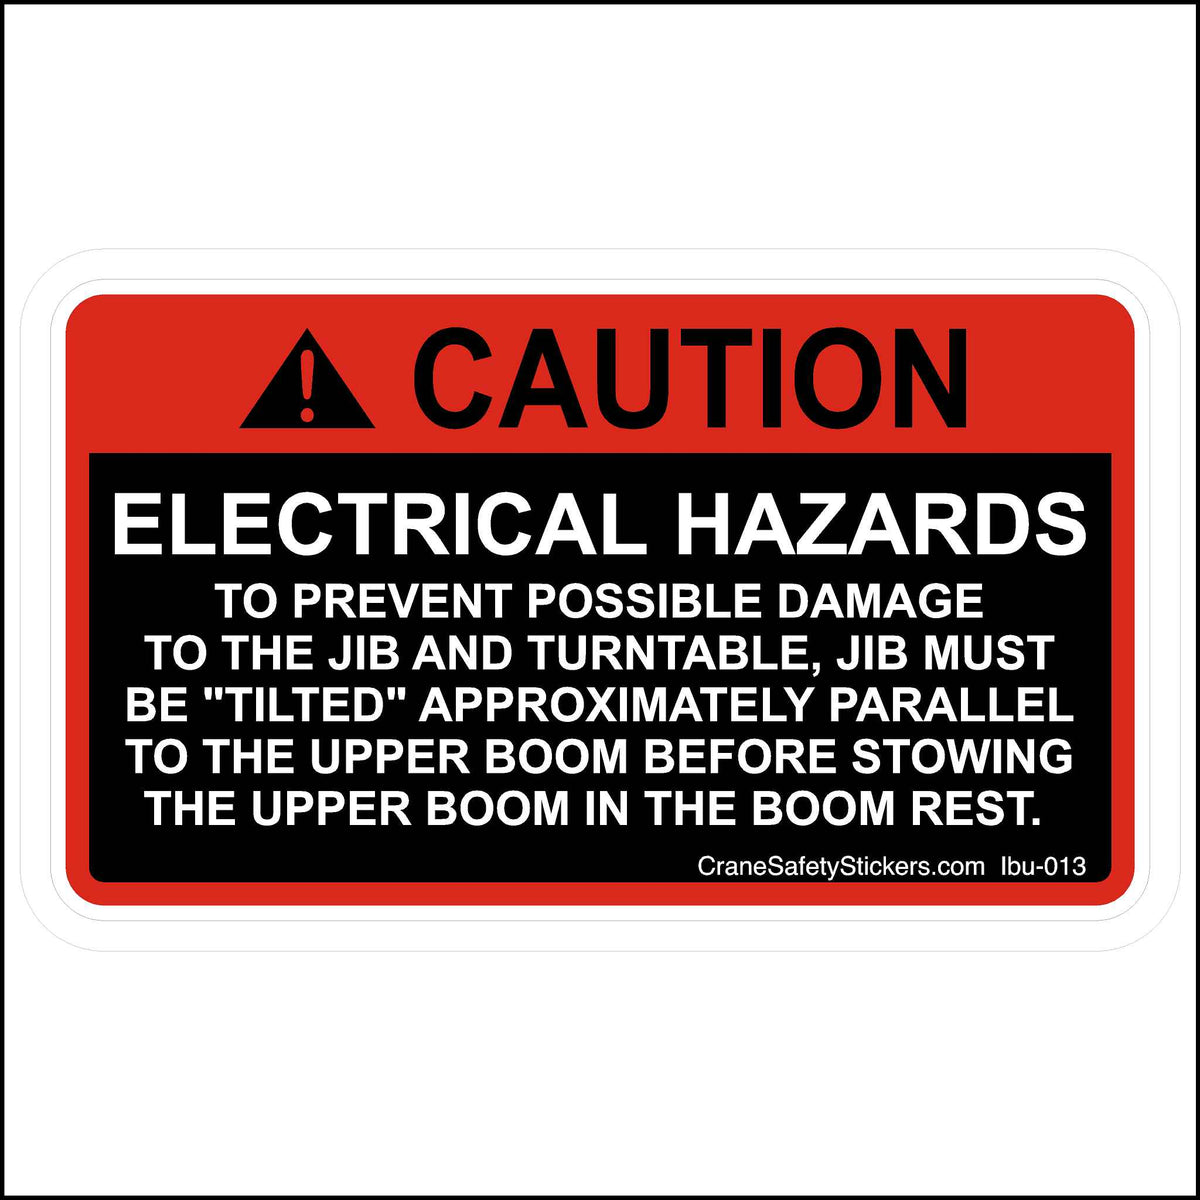 Jib and Turntable, Jib Must Be Tilted Parallel to the Upper Boom Before Stowing Sticker Printed With. CAUTION!  ELECTRICAL HAZARDS TO PREVENT POSSIBLE DAMAGE TO THE JIB AND TURNTABLE, JIB MUST BE &quot;TILTED&quot; APPROXIMATELY PARALLEL TO THE UPPER BOOM BEFORE STOWING THE UPPER BOOM IN THE BOOM REST.